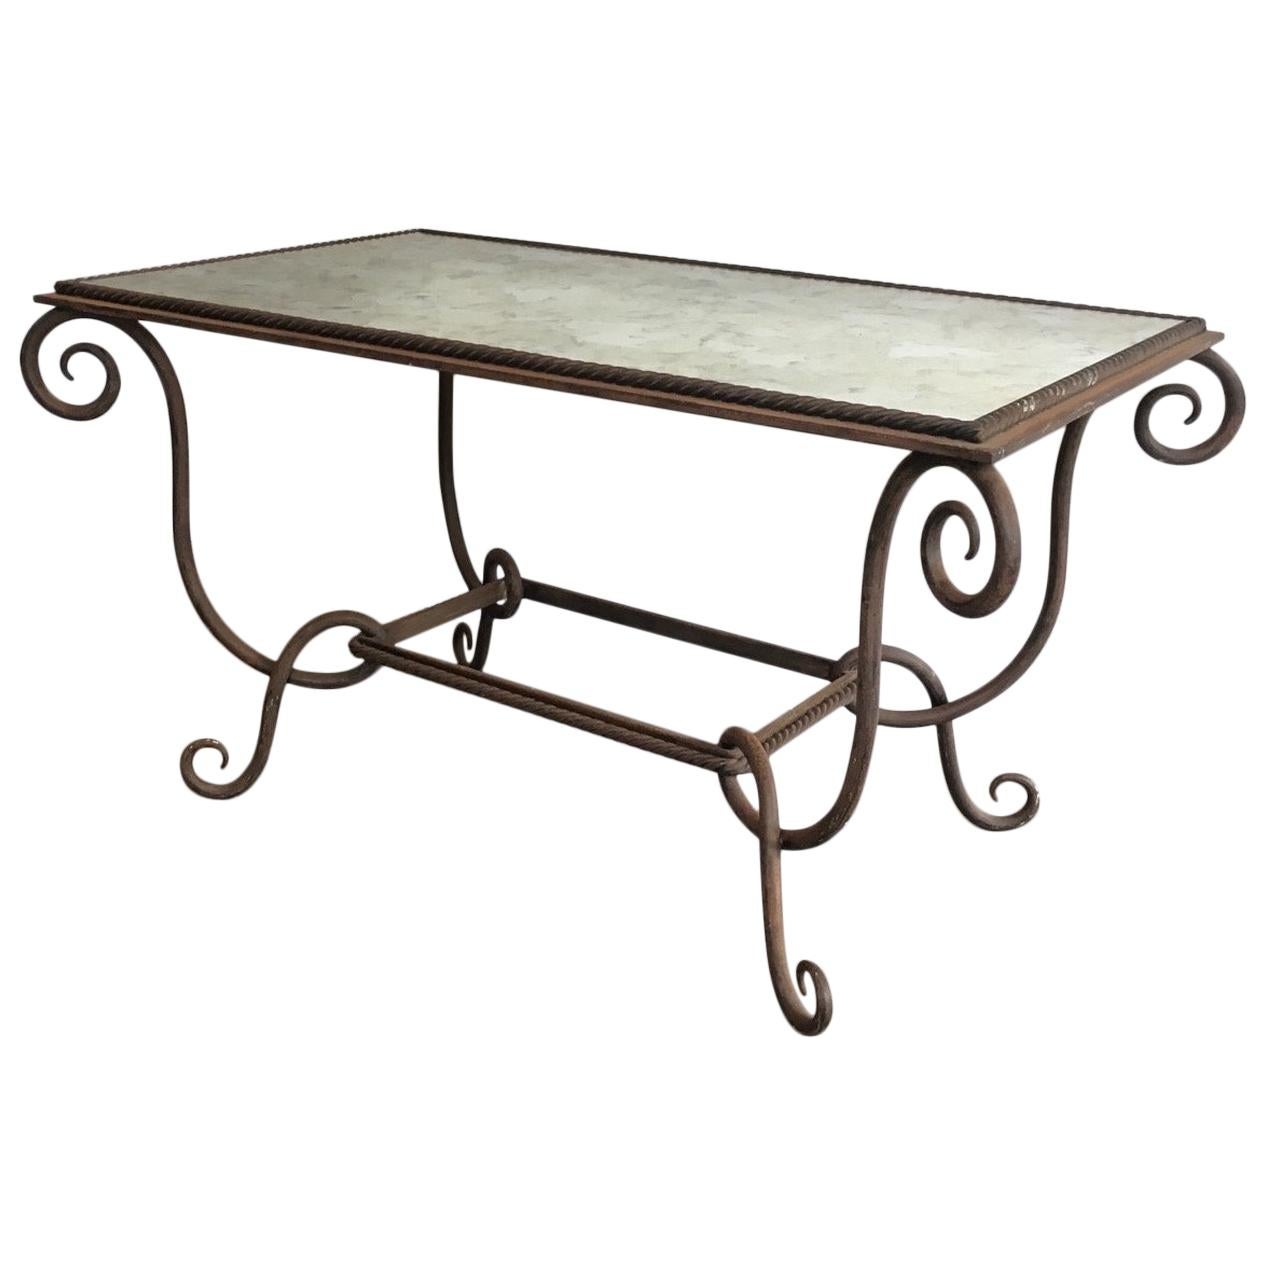 René Prou, Wrought and Hammered Iron Coffee Table with Faux-Antique Mirror Top